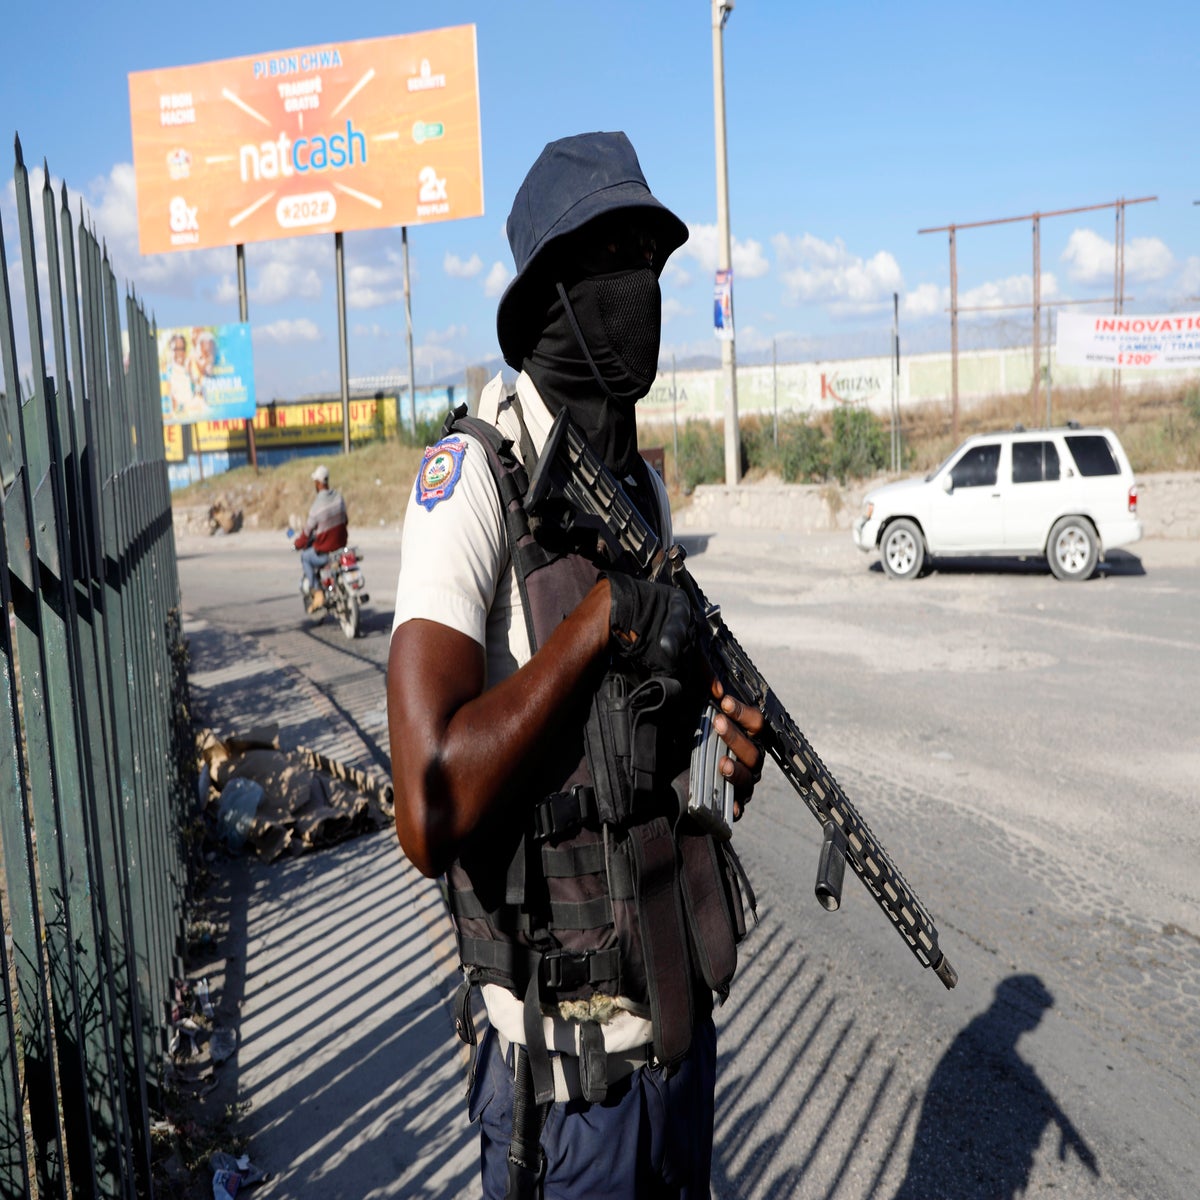 Haiti's crime rate more than doubles in last year